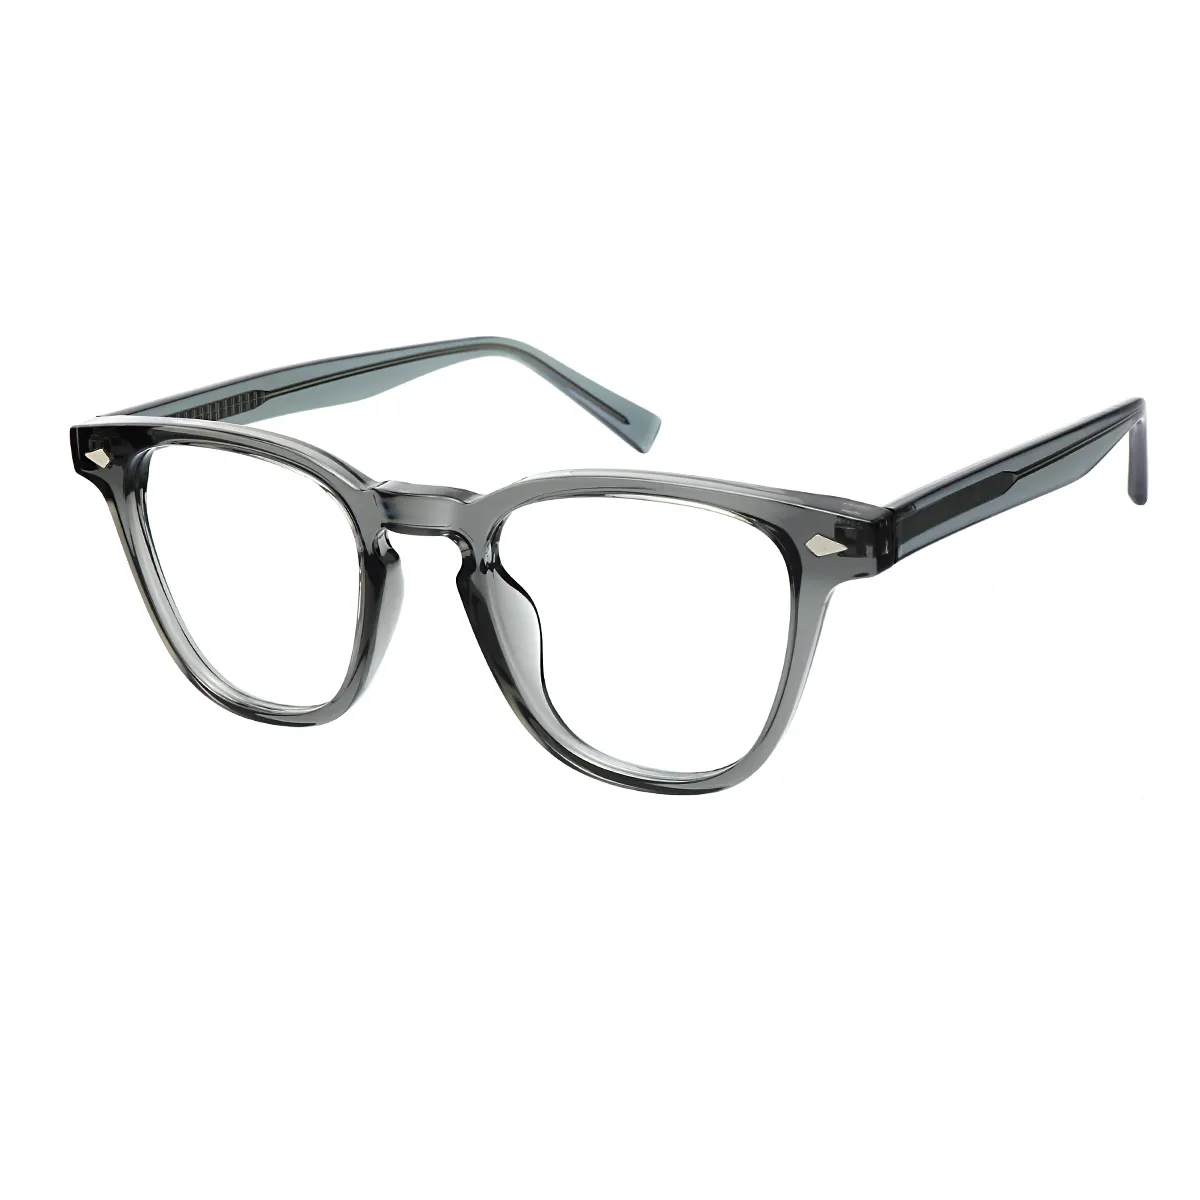 Amore - Square Gray-Transparent Glasses for Women